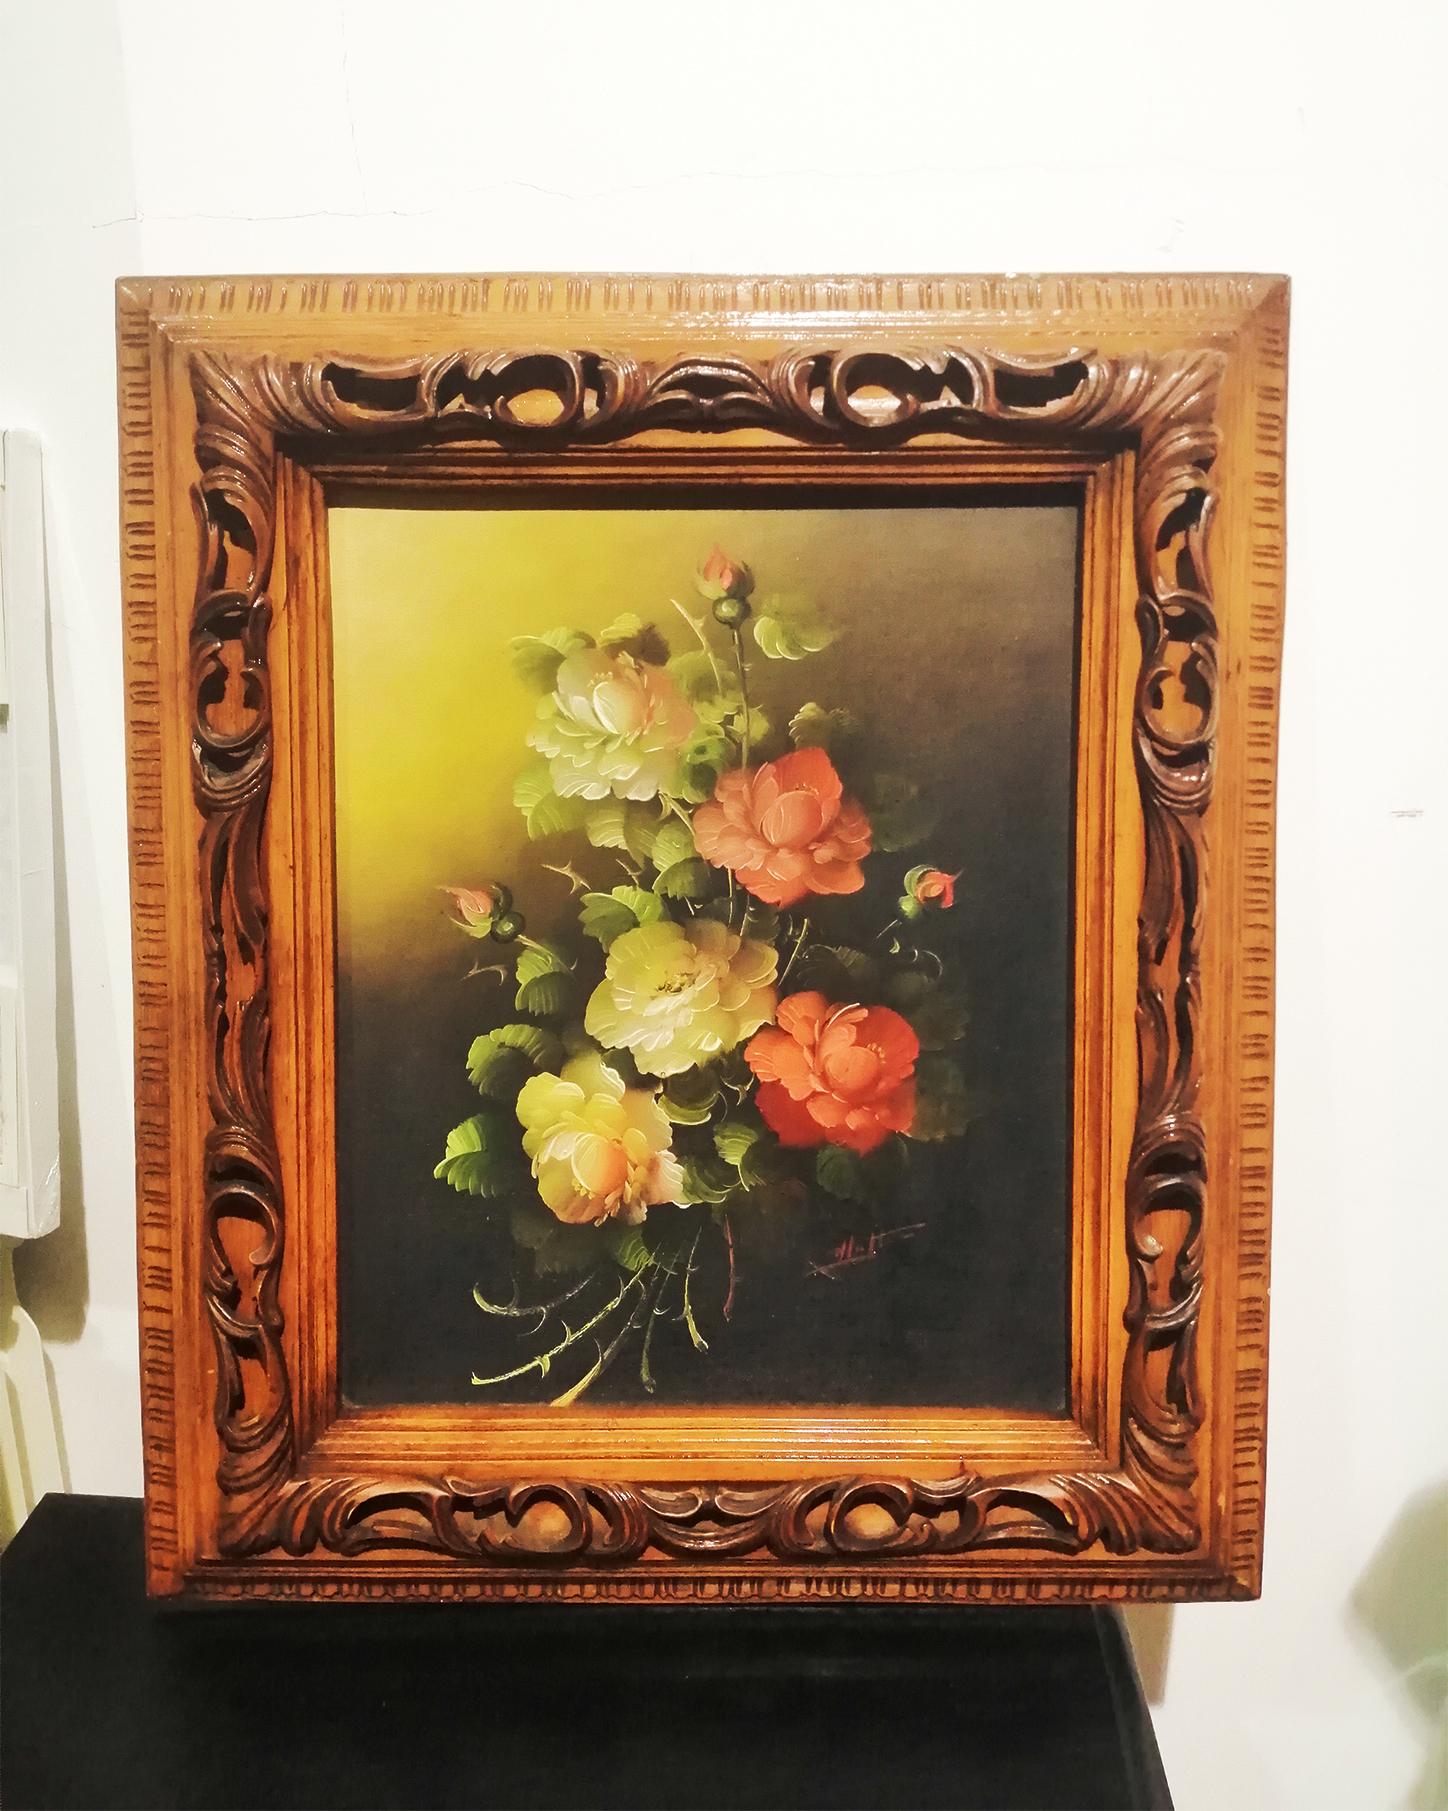 Midcentury decorative painting with a bouquet of flowers painted in oil on wood

Framed with wood and resin frame.

Flowers ,english country, victorian style, roses, English countryside

*It does not have any artistic value, its value is purely